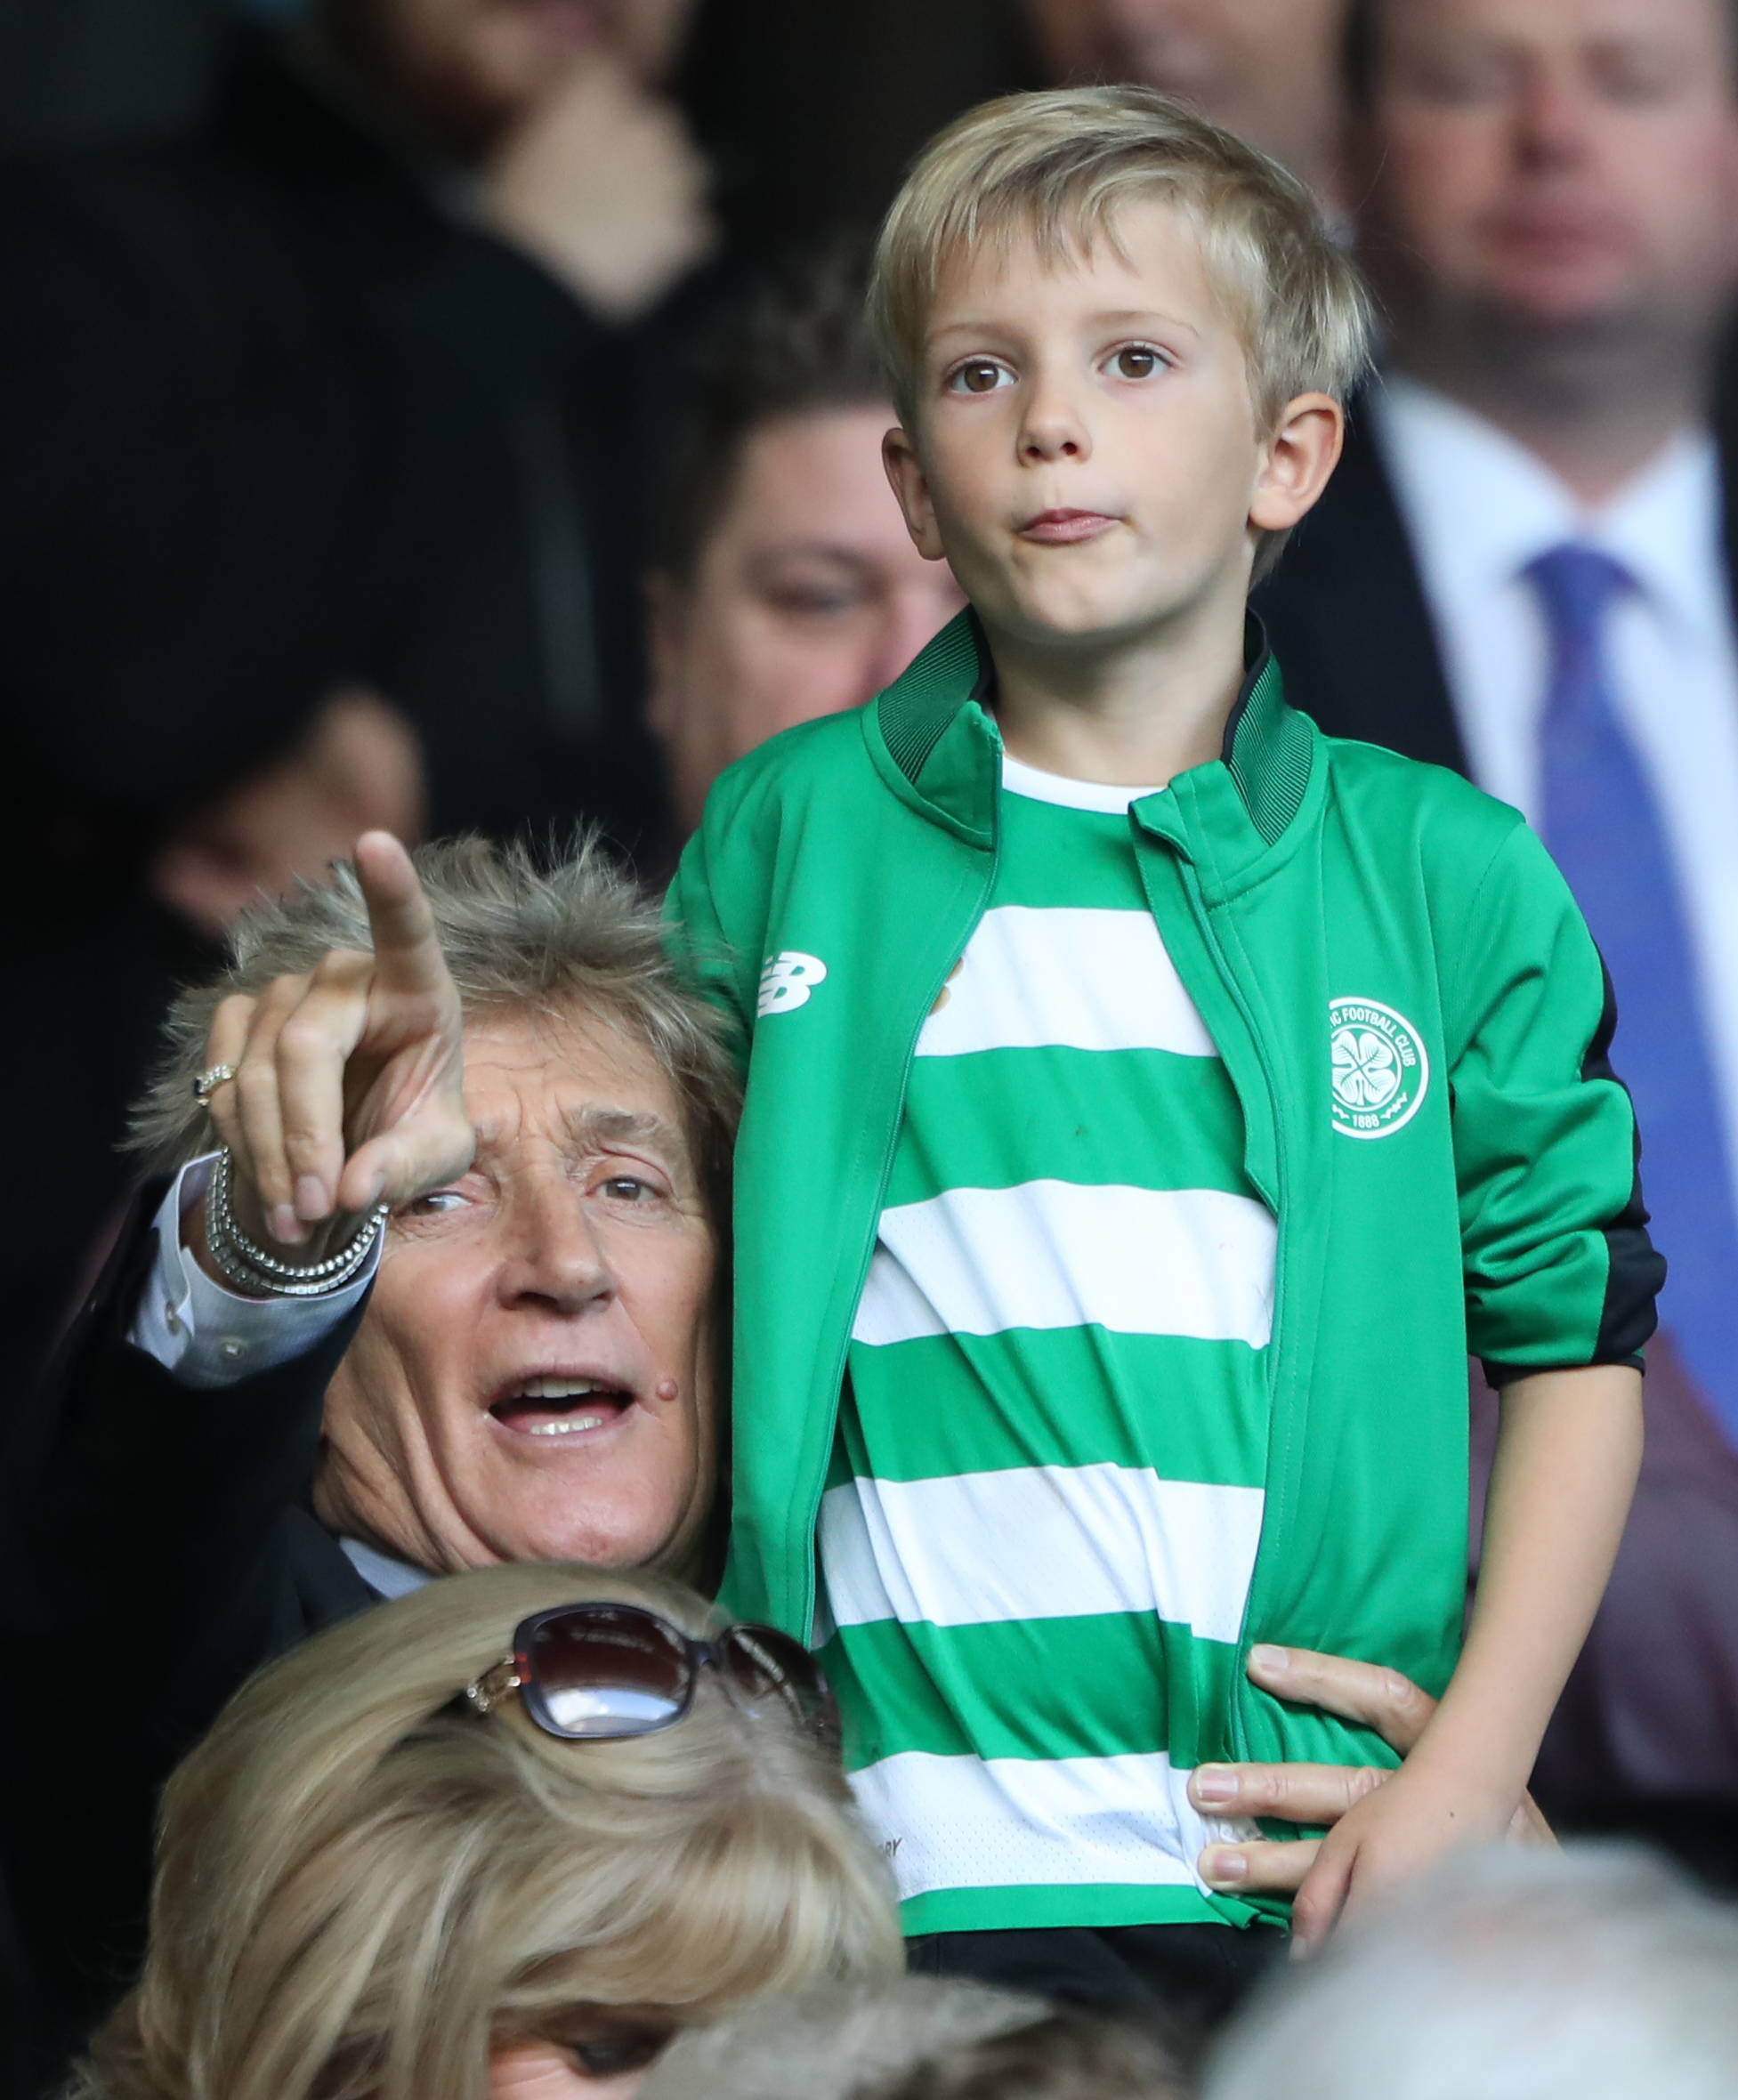 Rod Stewart and his son Aiden in the stands during the Ladbrokes Scottish Premiership match at Celtic Park, Glasgow | Source: Getty Images